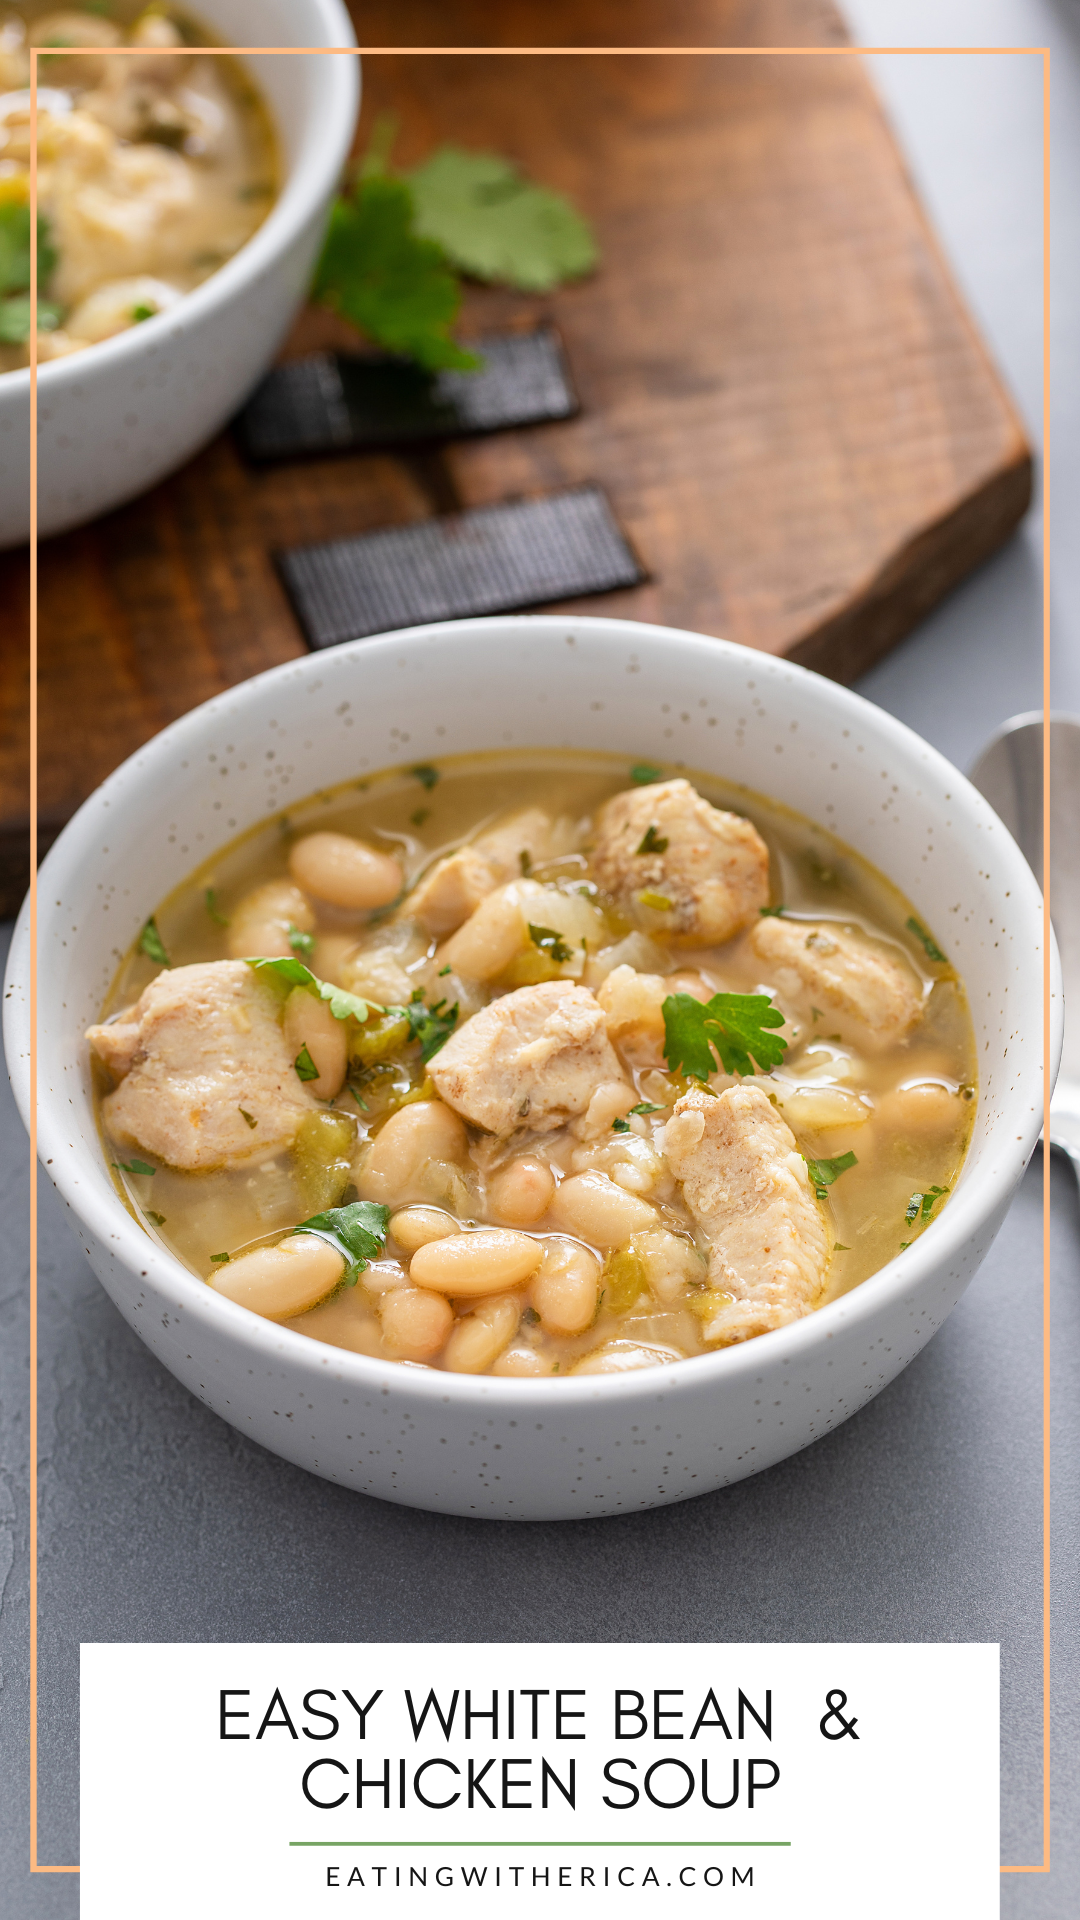 Looking for the perfect cozy weather meal? CLICK HERE to try this hearty and delicious yet easy and quick White Bean & Chicken Soup Recipe! 